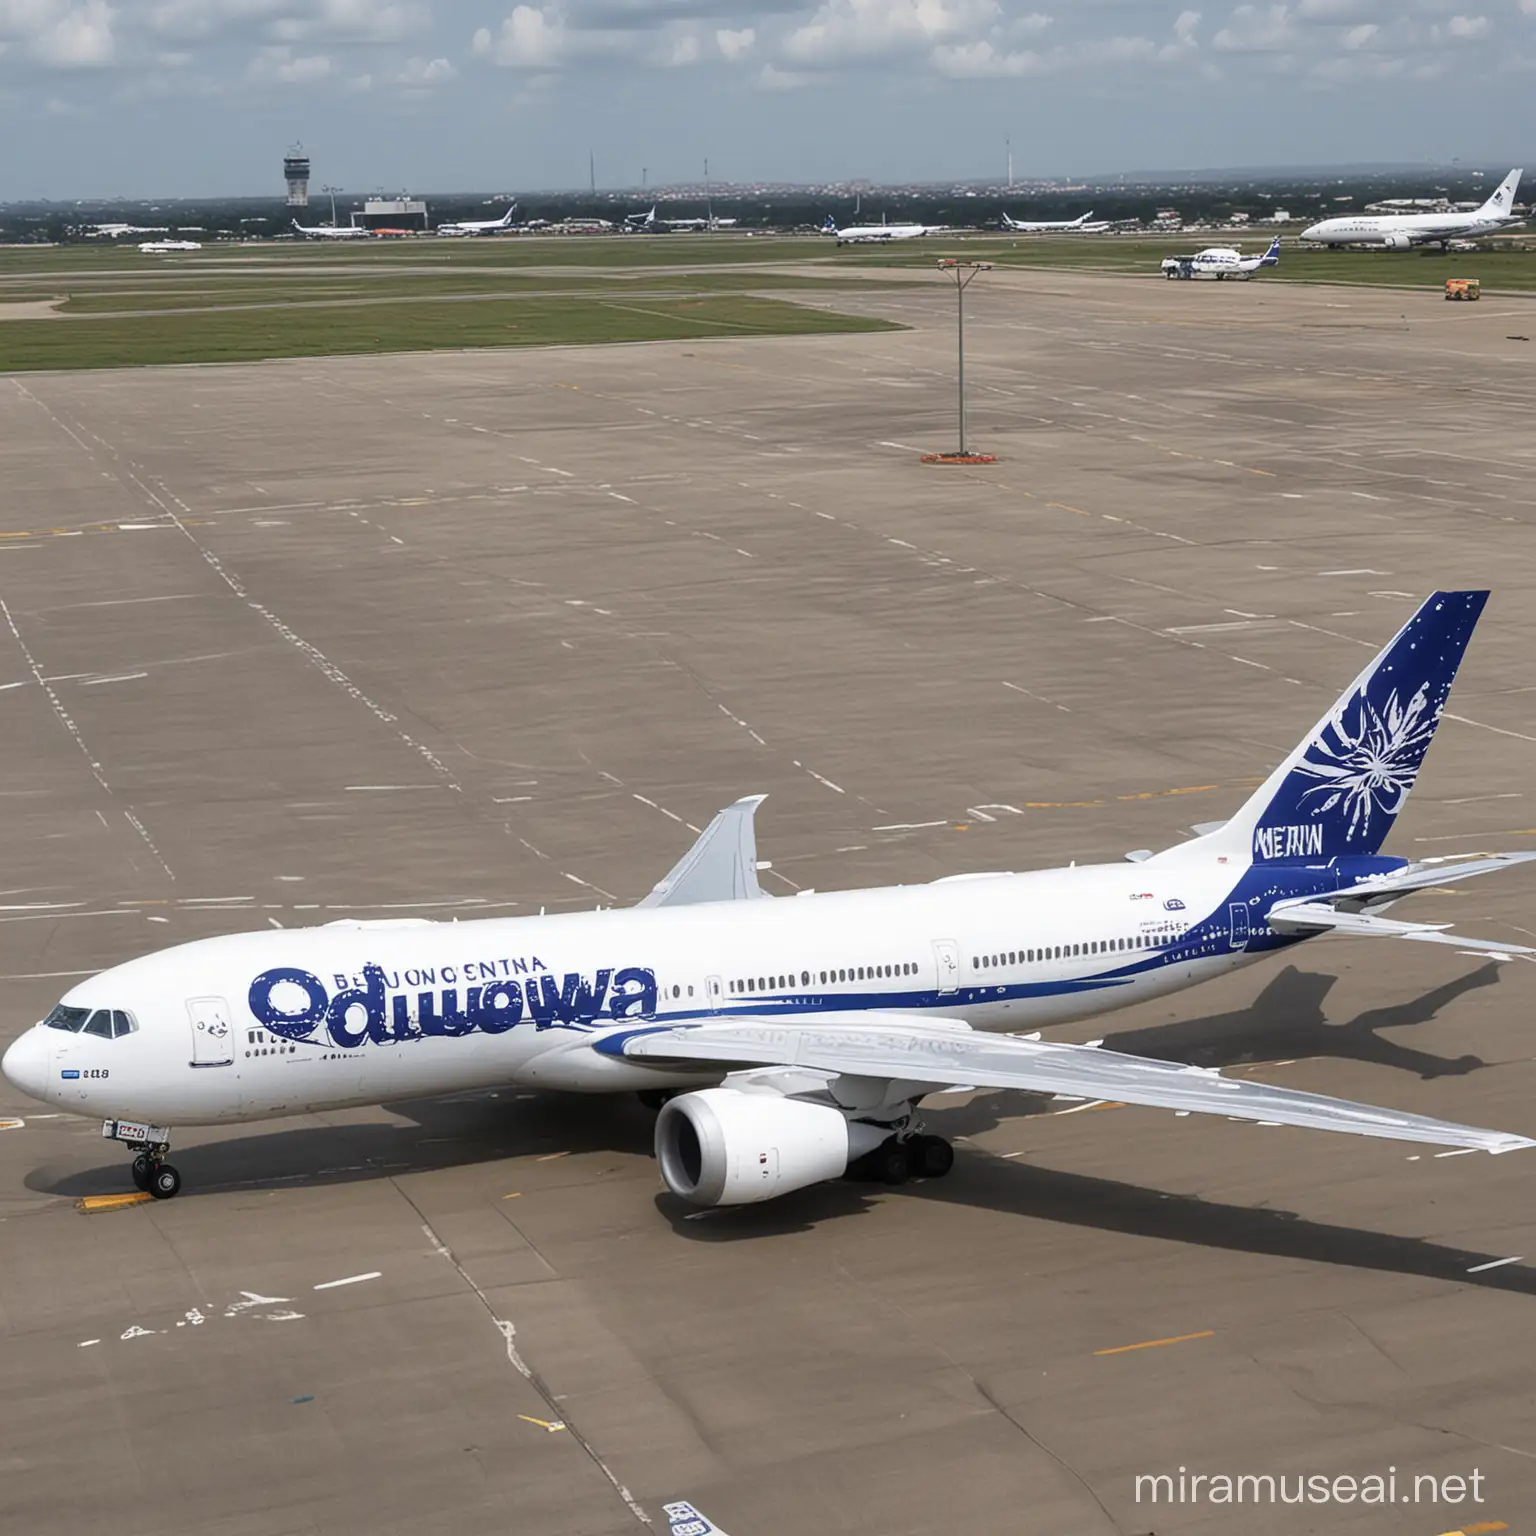 create a boing  767 with a branded name "oduduwa nation" on it let the body be blue and white with stars on it,place on fine run way. no spelling mistake